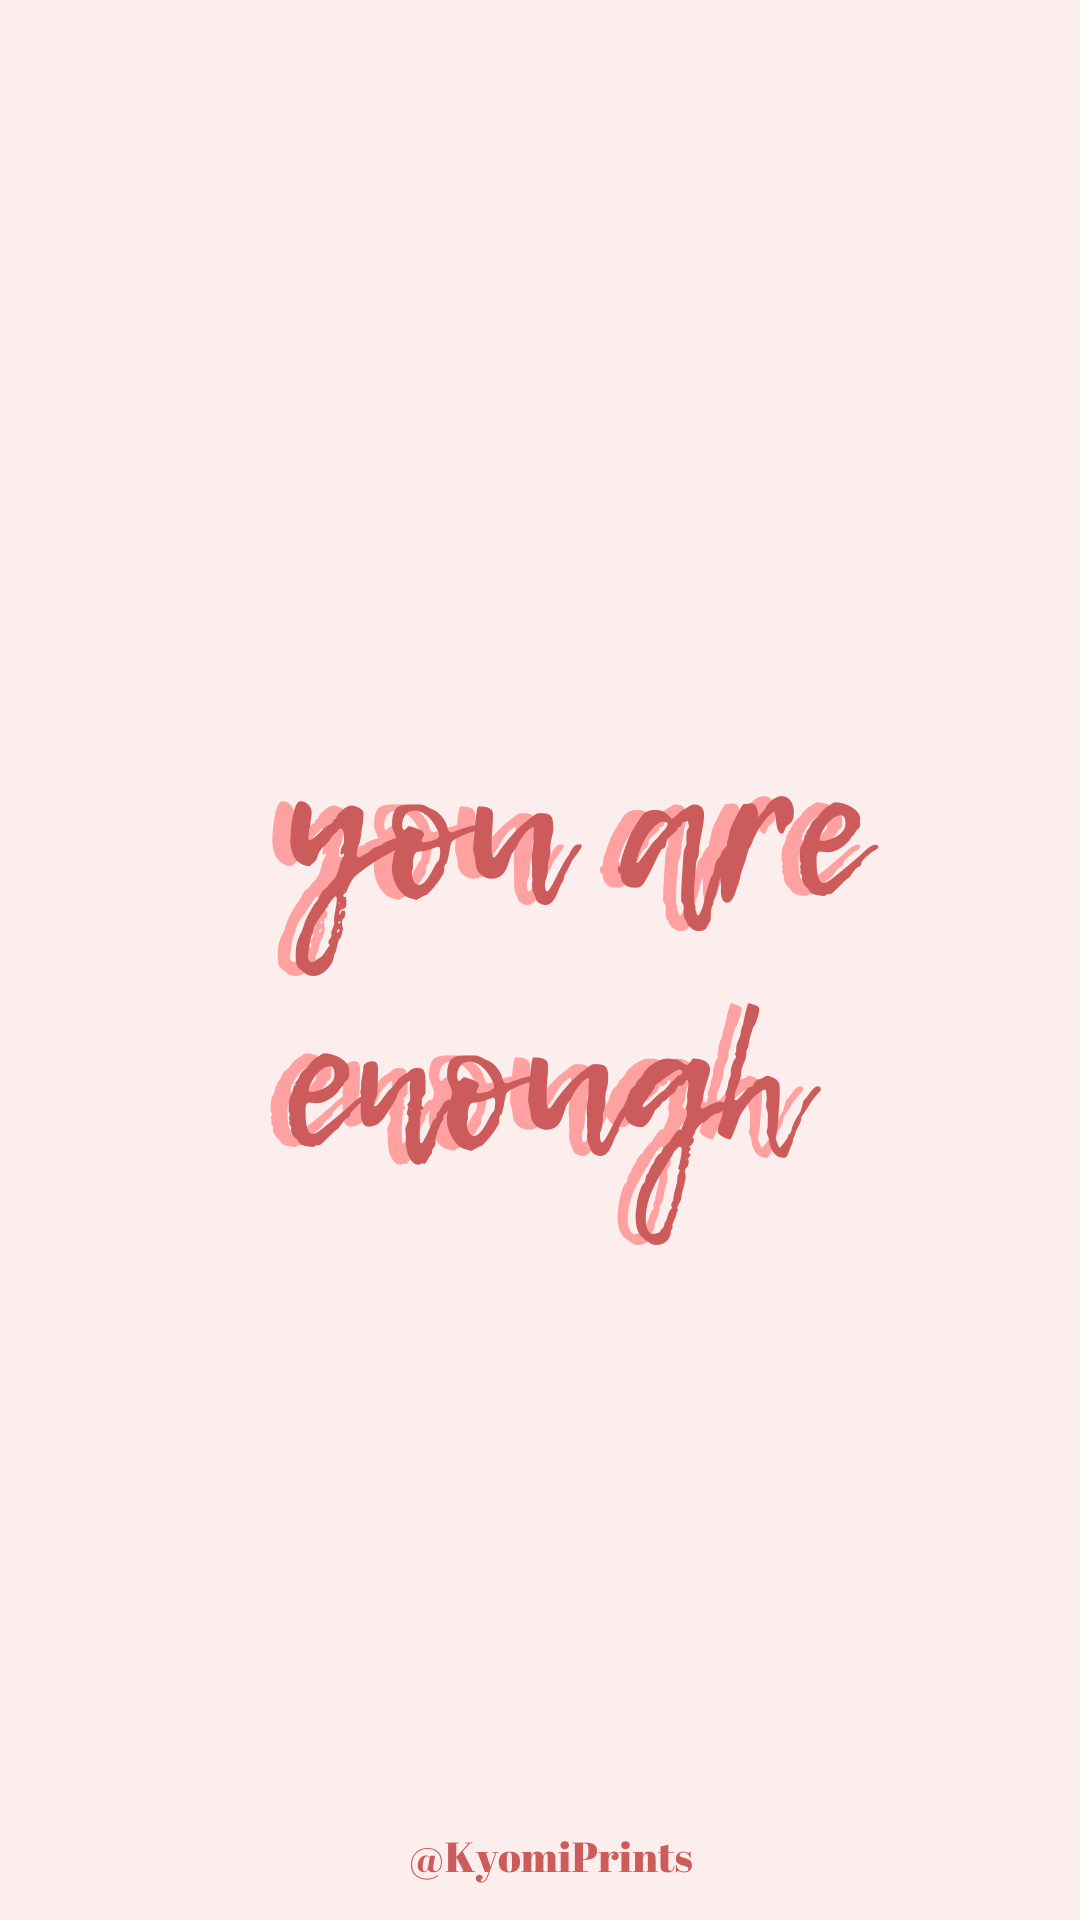 You are enough wallpaper, free wallpaper, iPhone wallpaper, pink aesthetics backg. Pink wallpaper iphone, iPhone wallpaper tumblr aesthetic, Pastel pink aesthetic